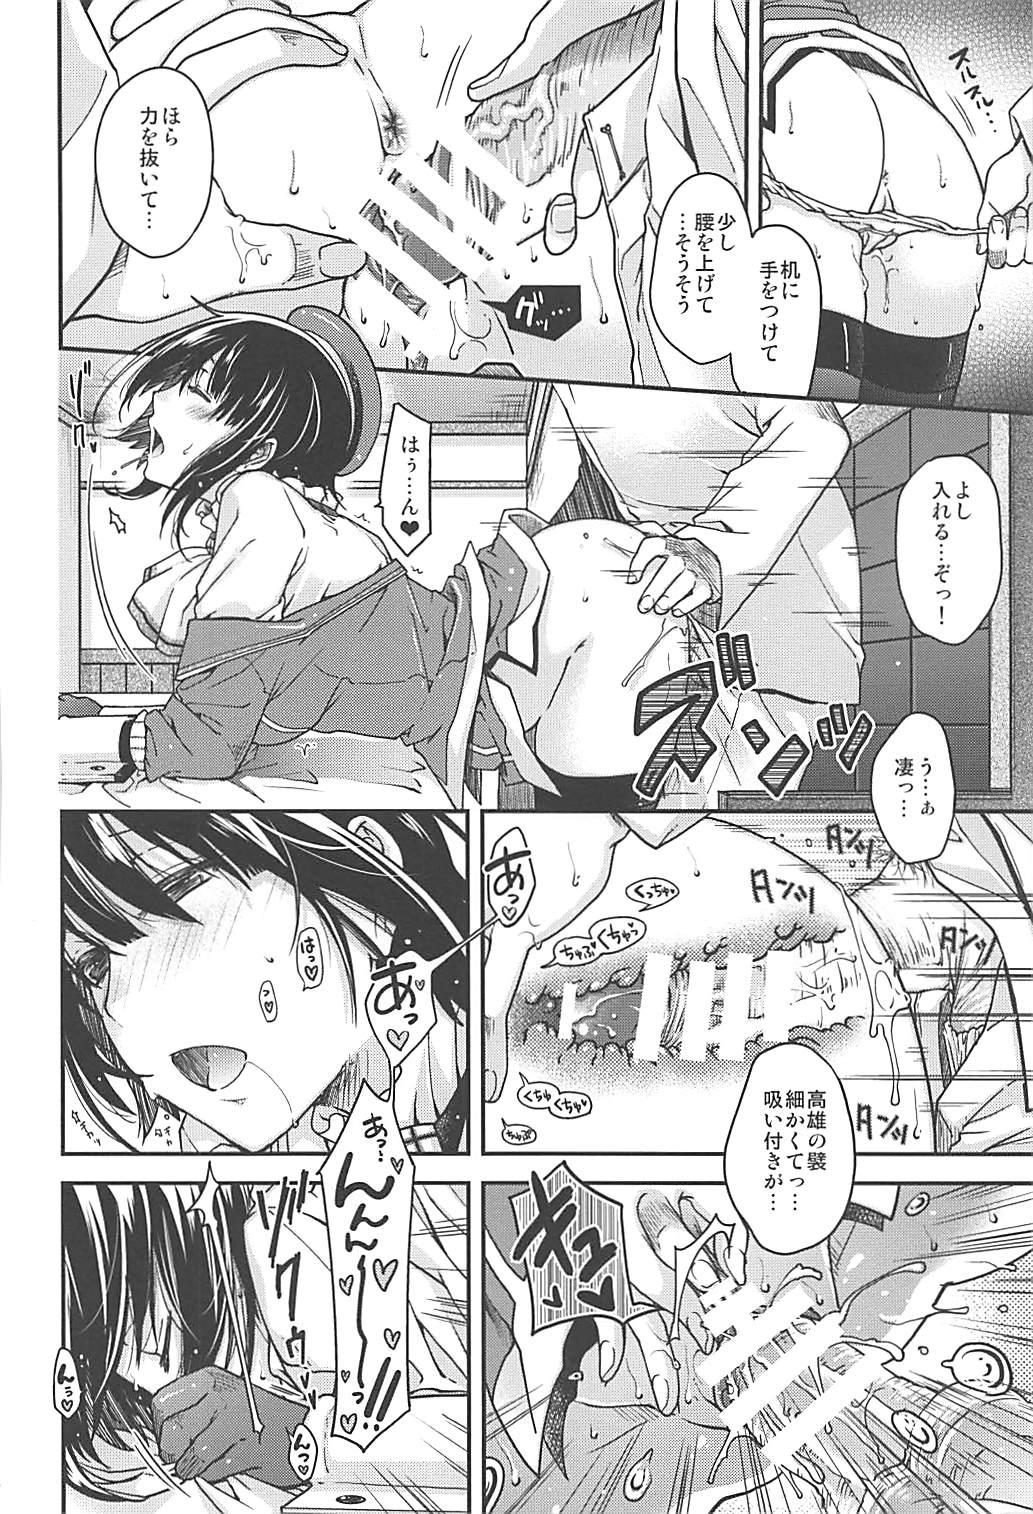 Sis immoral - Kantai collection Tattooed - Page 5